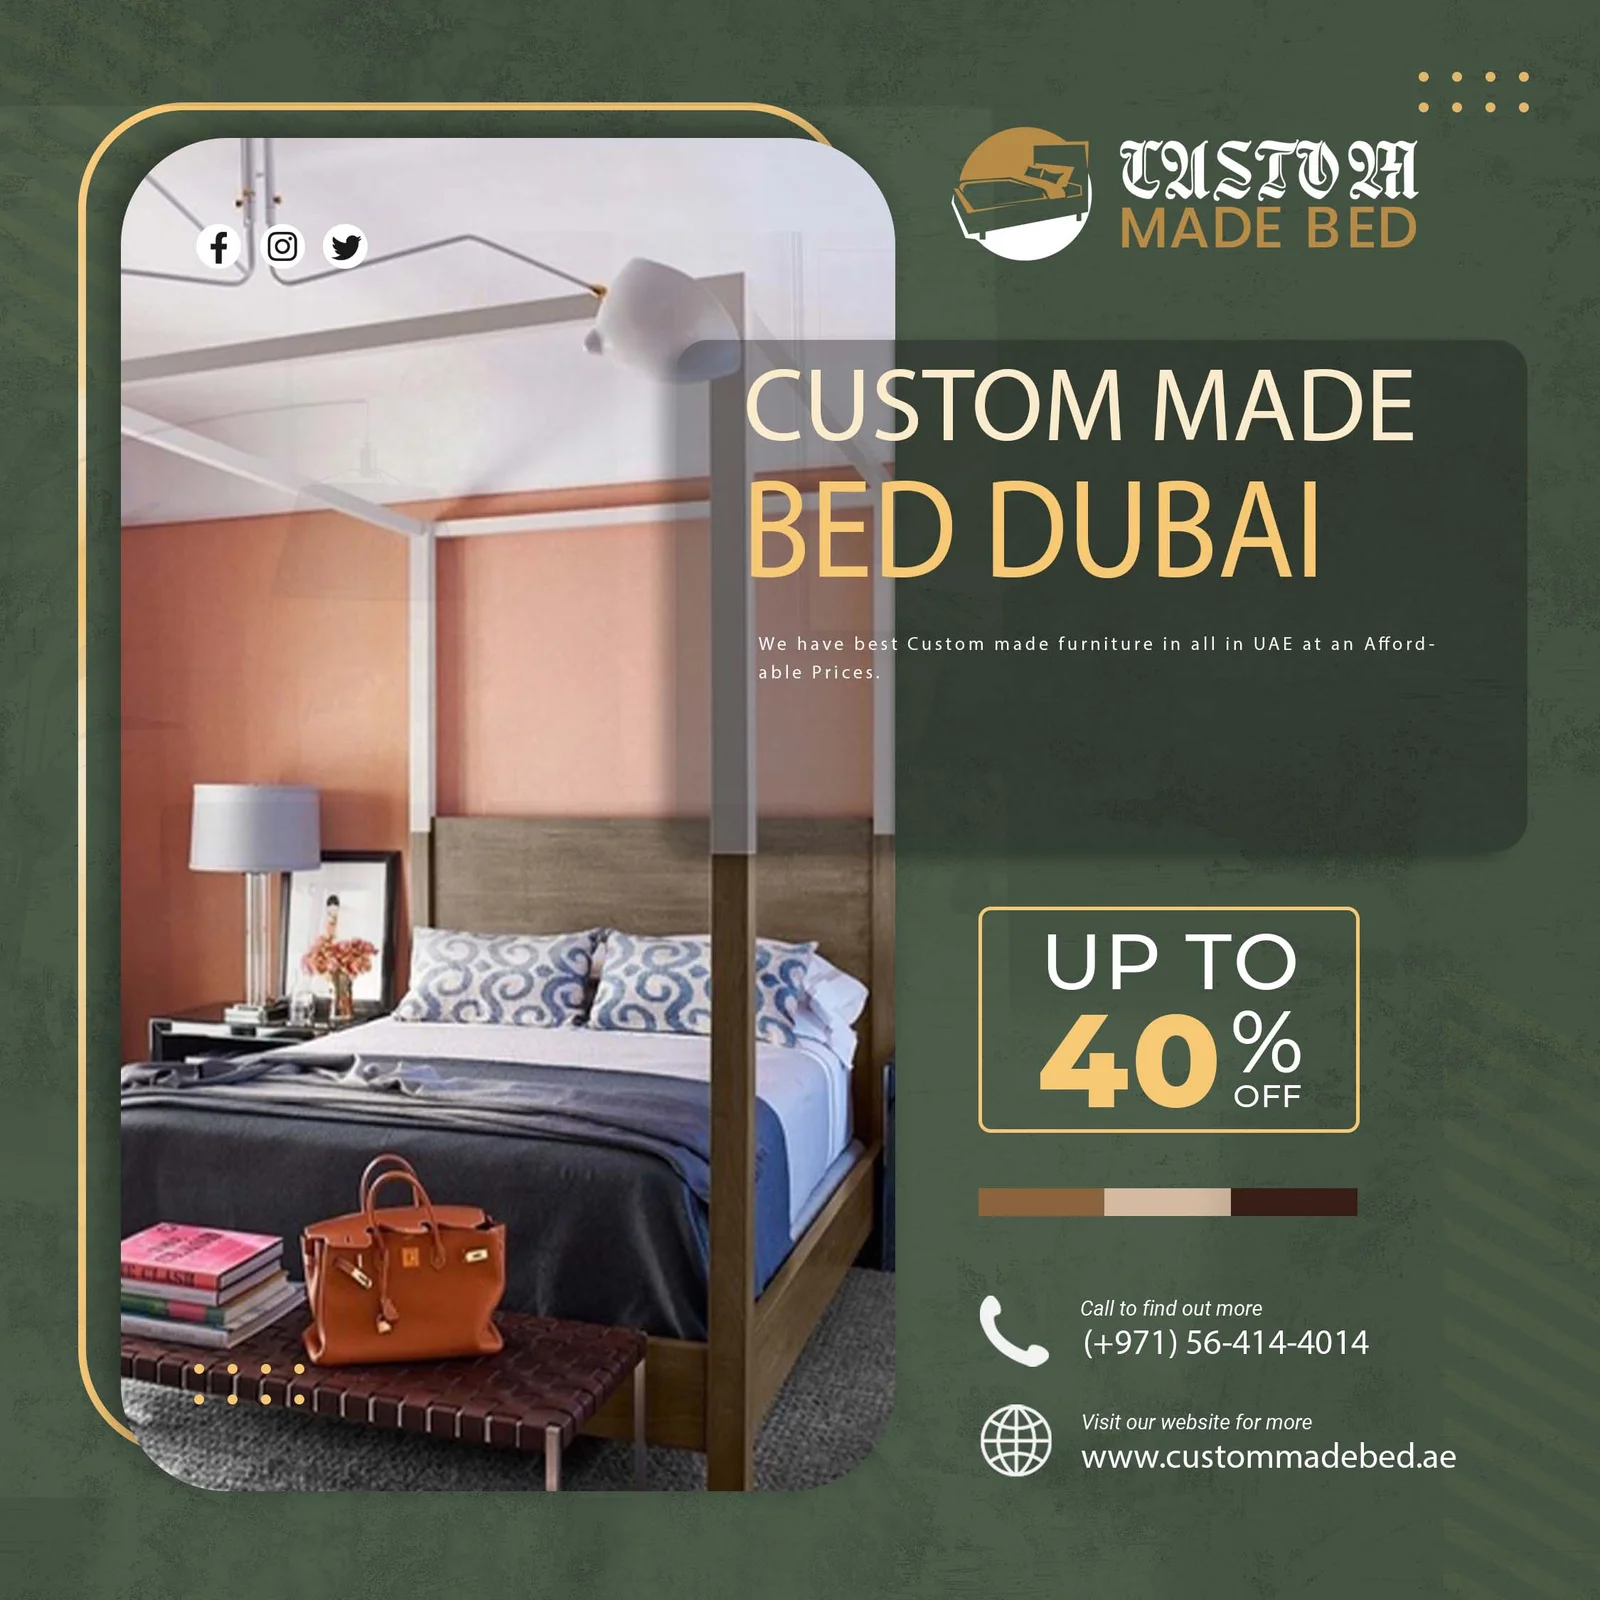 custommadebed Profile Picture